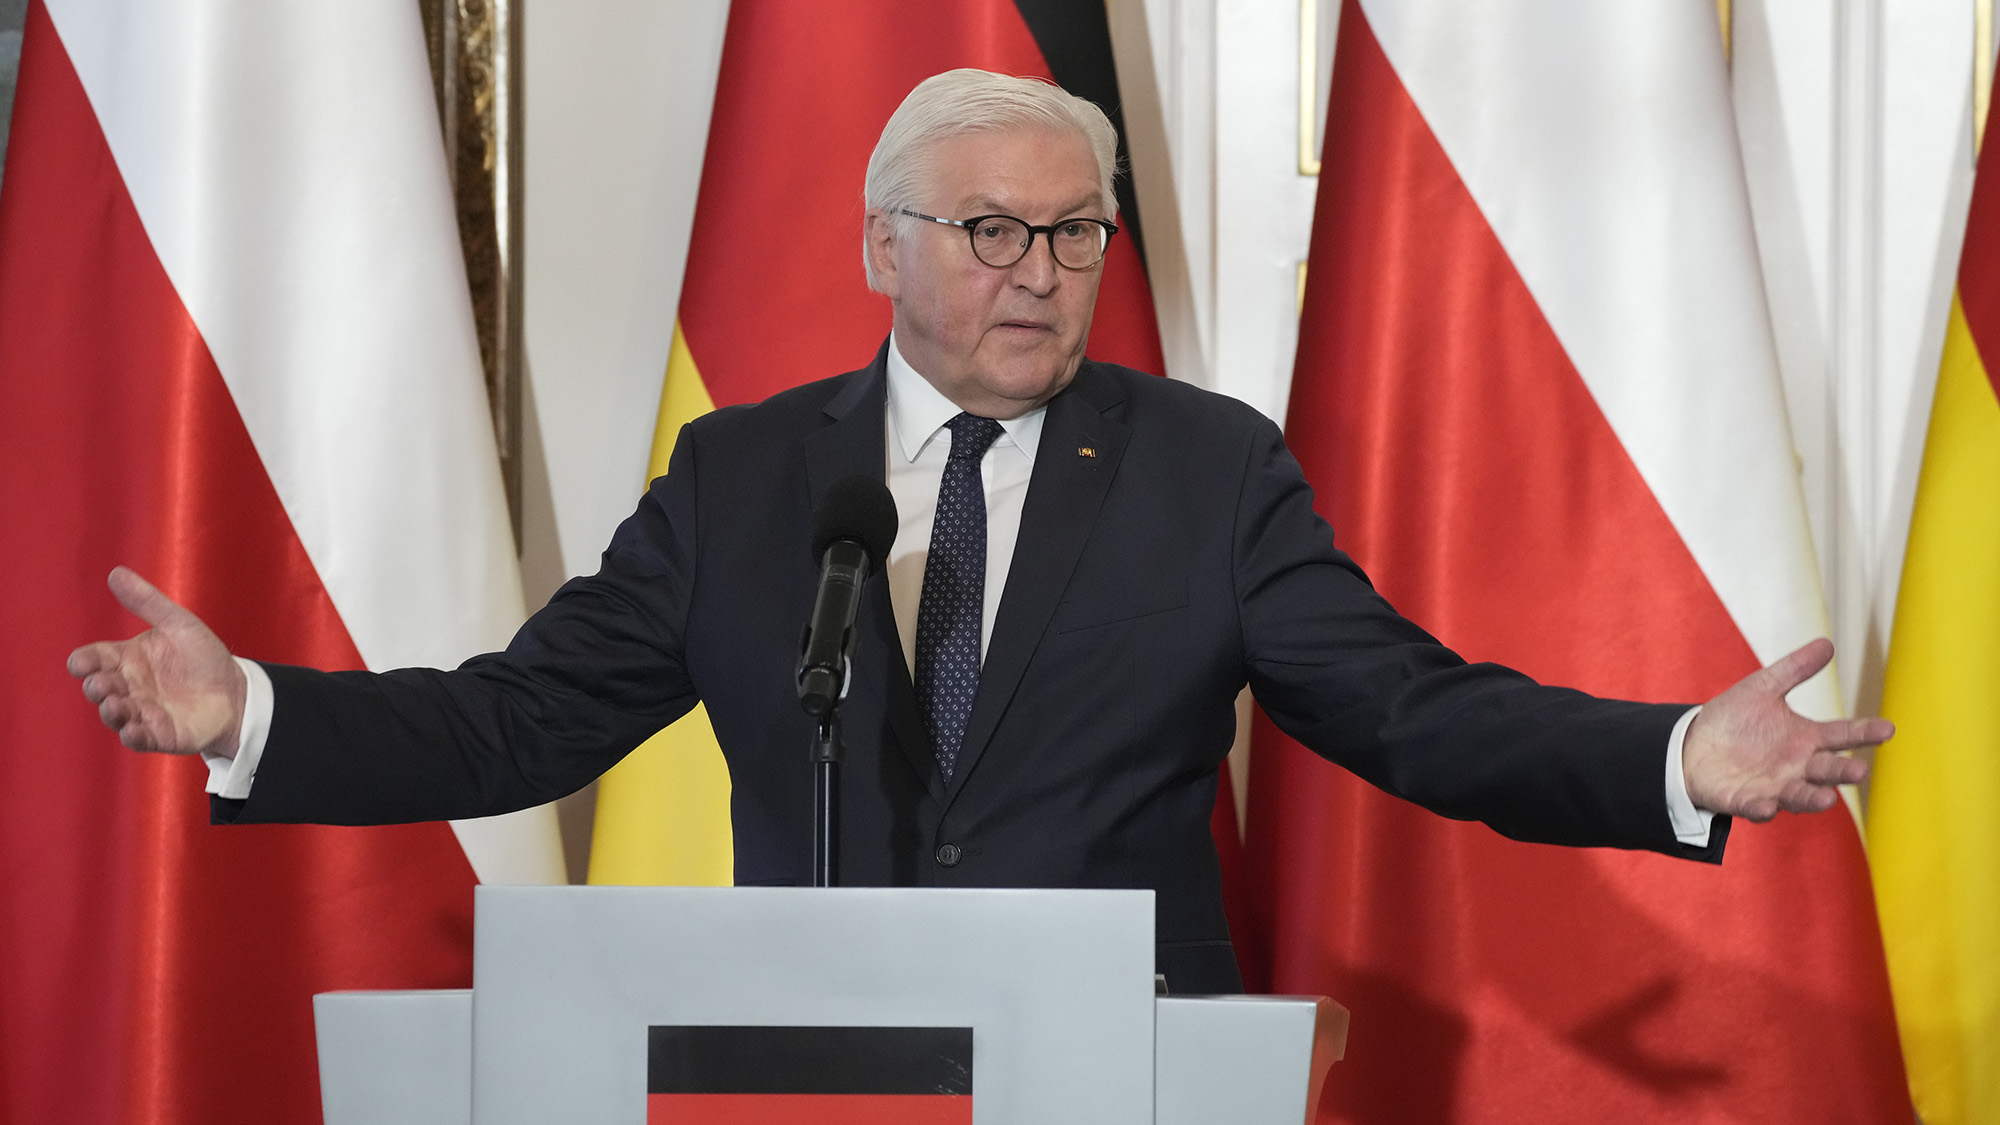 German President Frank-Walter Steinmeier gestures during a news conference with Polish President Andrzej Duda in Warsaw, Poland on Tuesday, April 12.